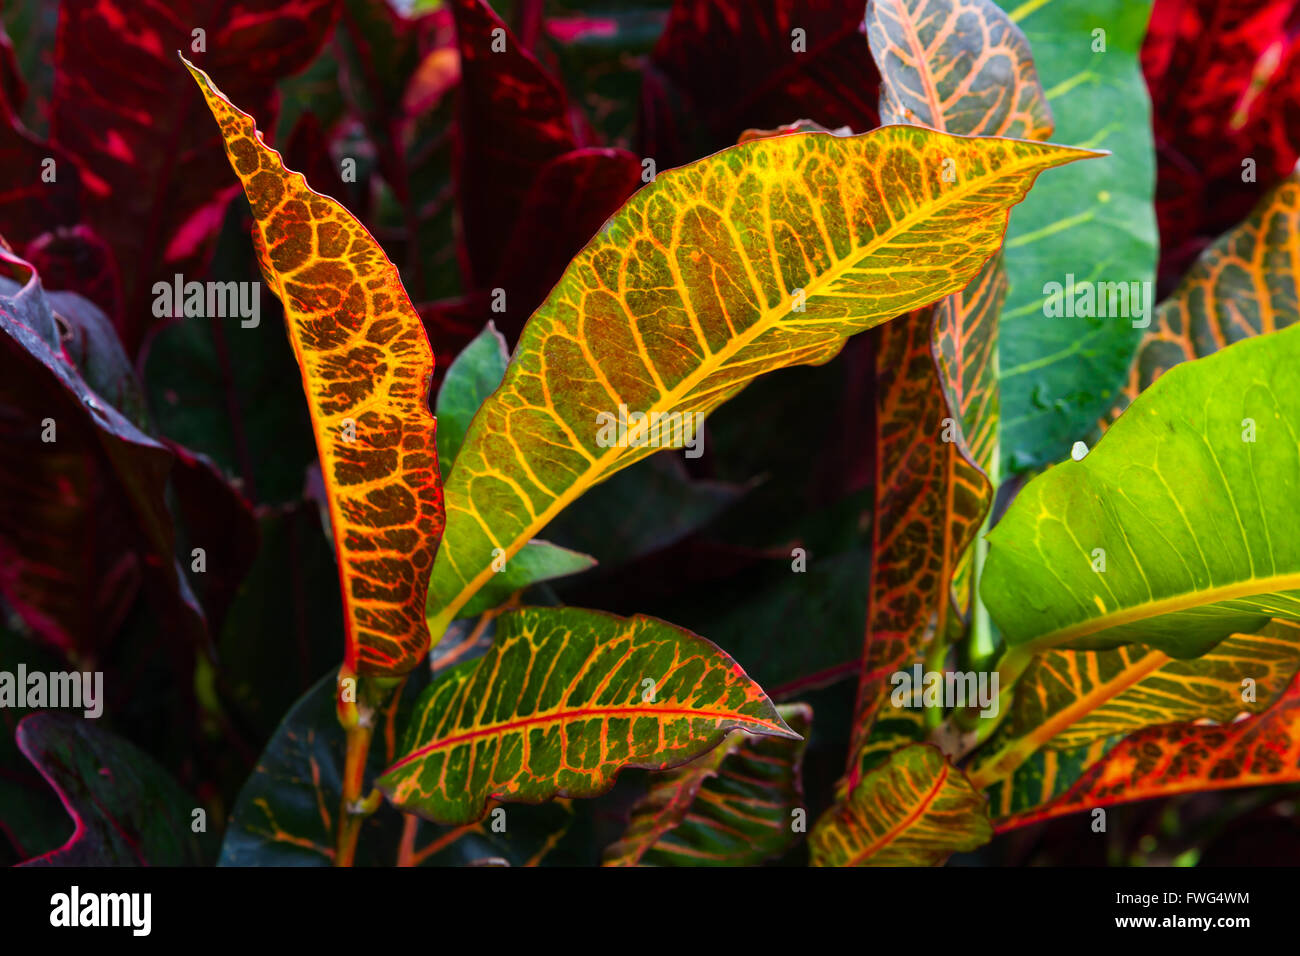 Closeup photo of colorful wild tropical plant leaves Stock Photo